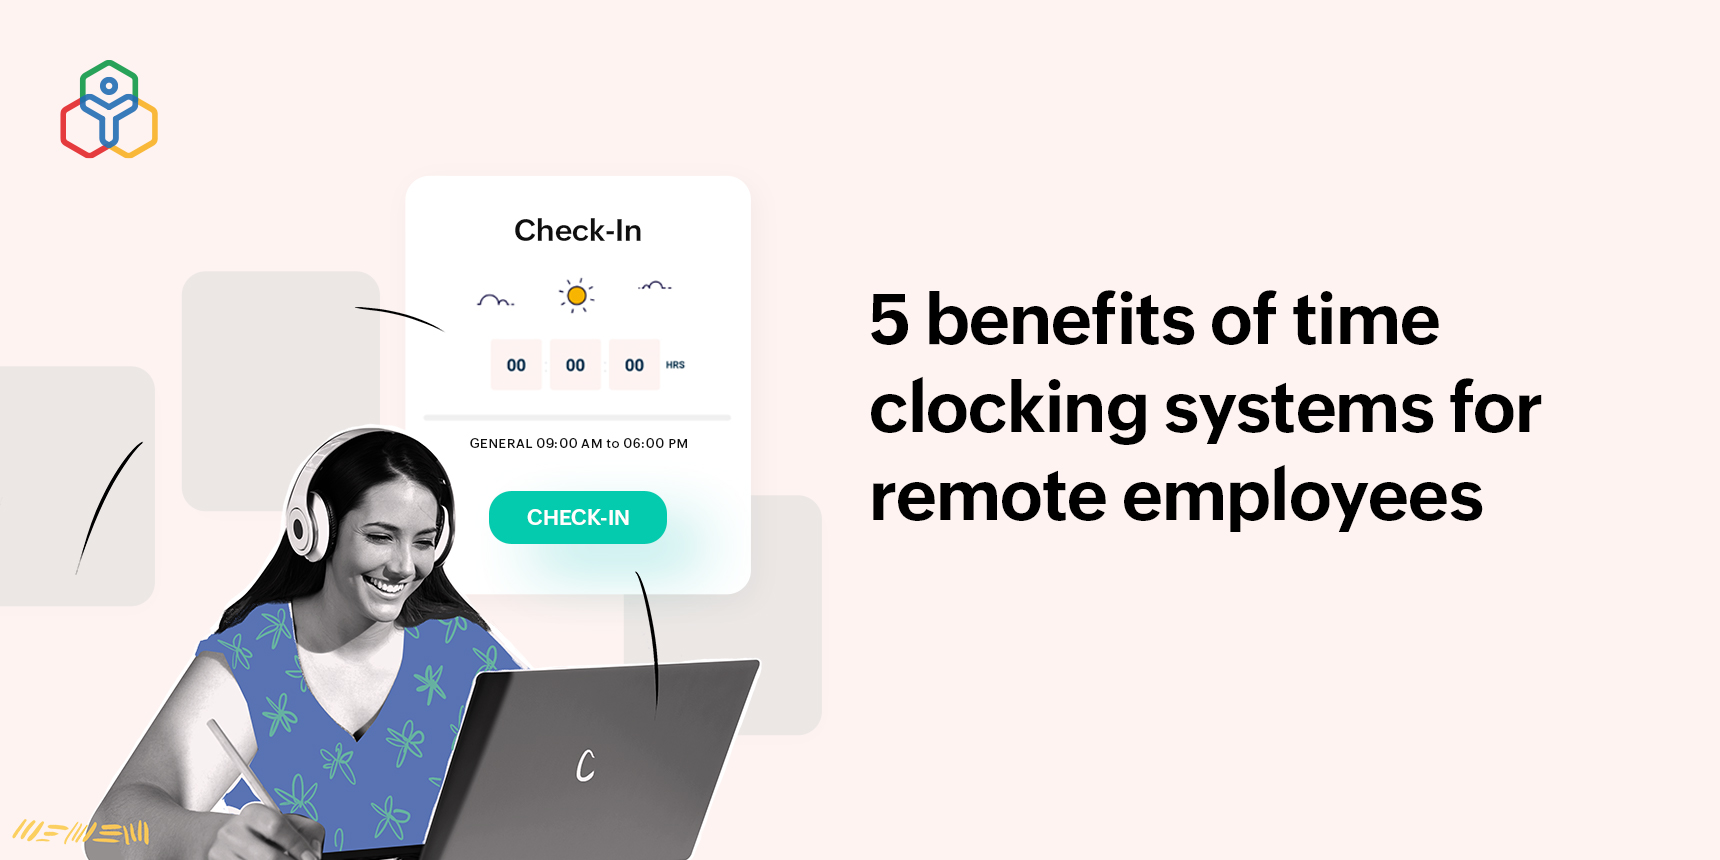 Improve remote employee management with a time clocking system HR